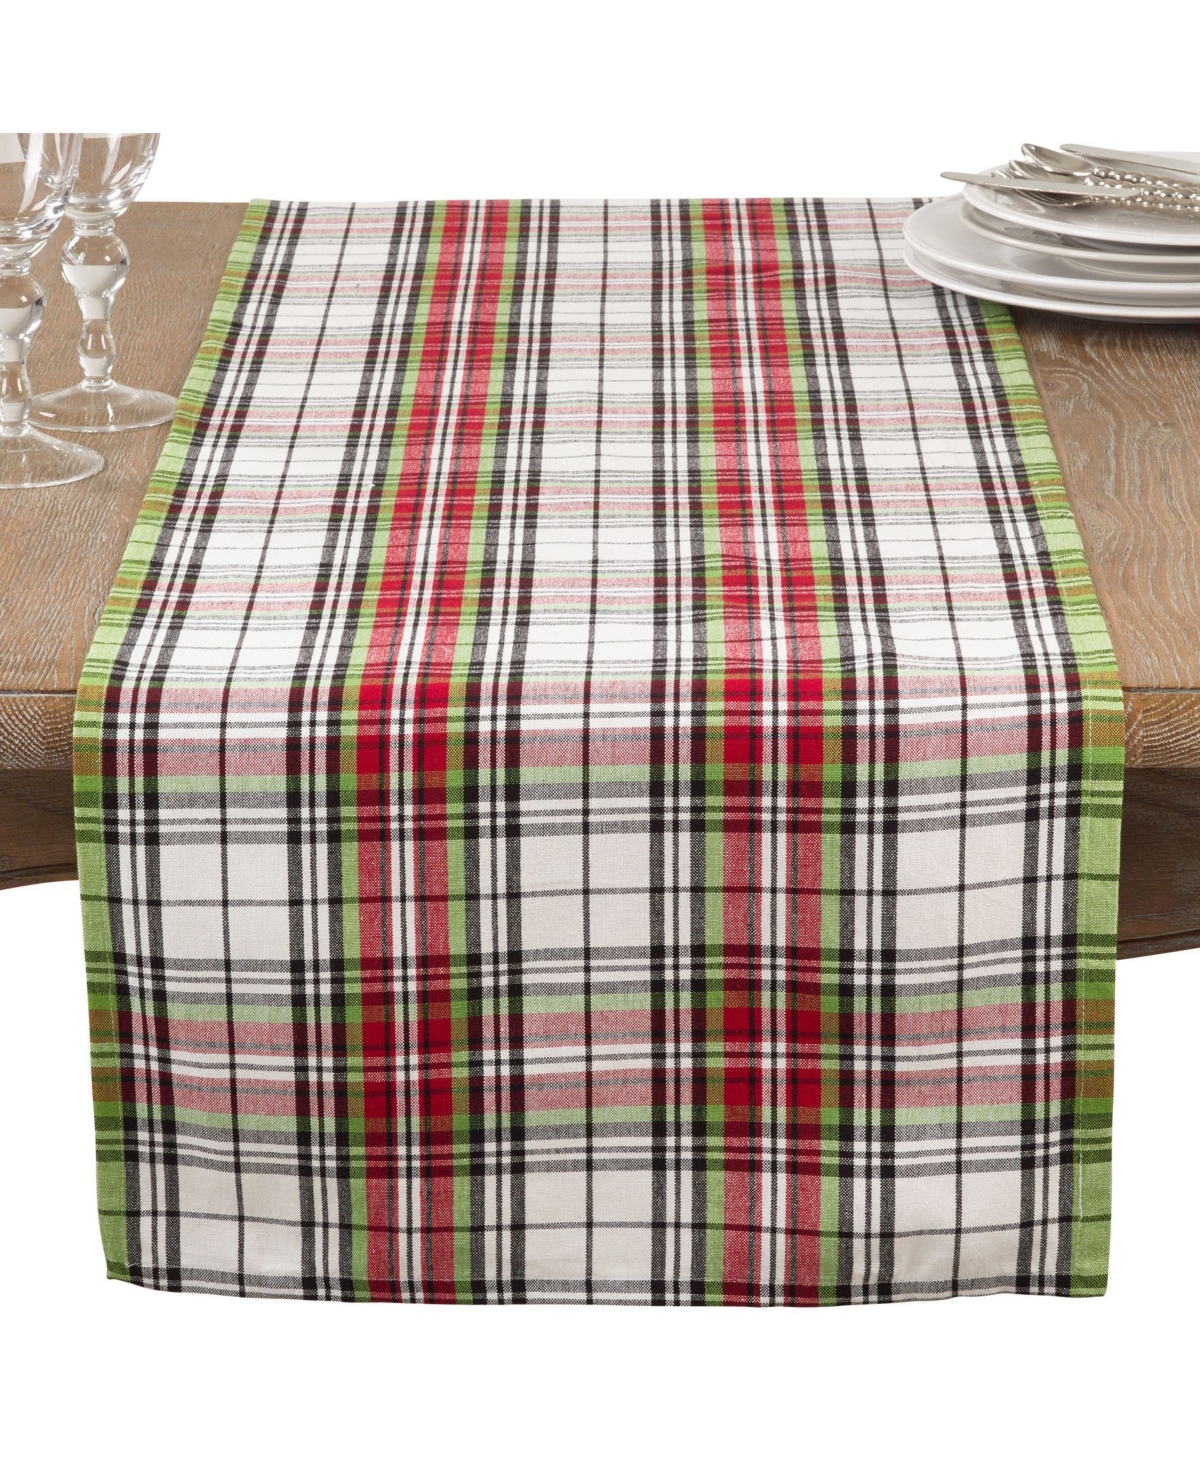 UPC 789323324900 product image for Saro Lifestyle Hensel Collection Classic Plaid Design Cotton Table Runner | upcitemdb.com